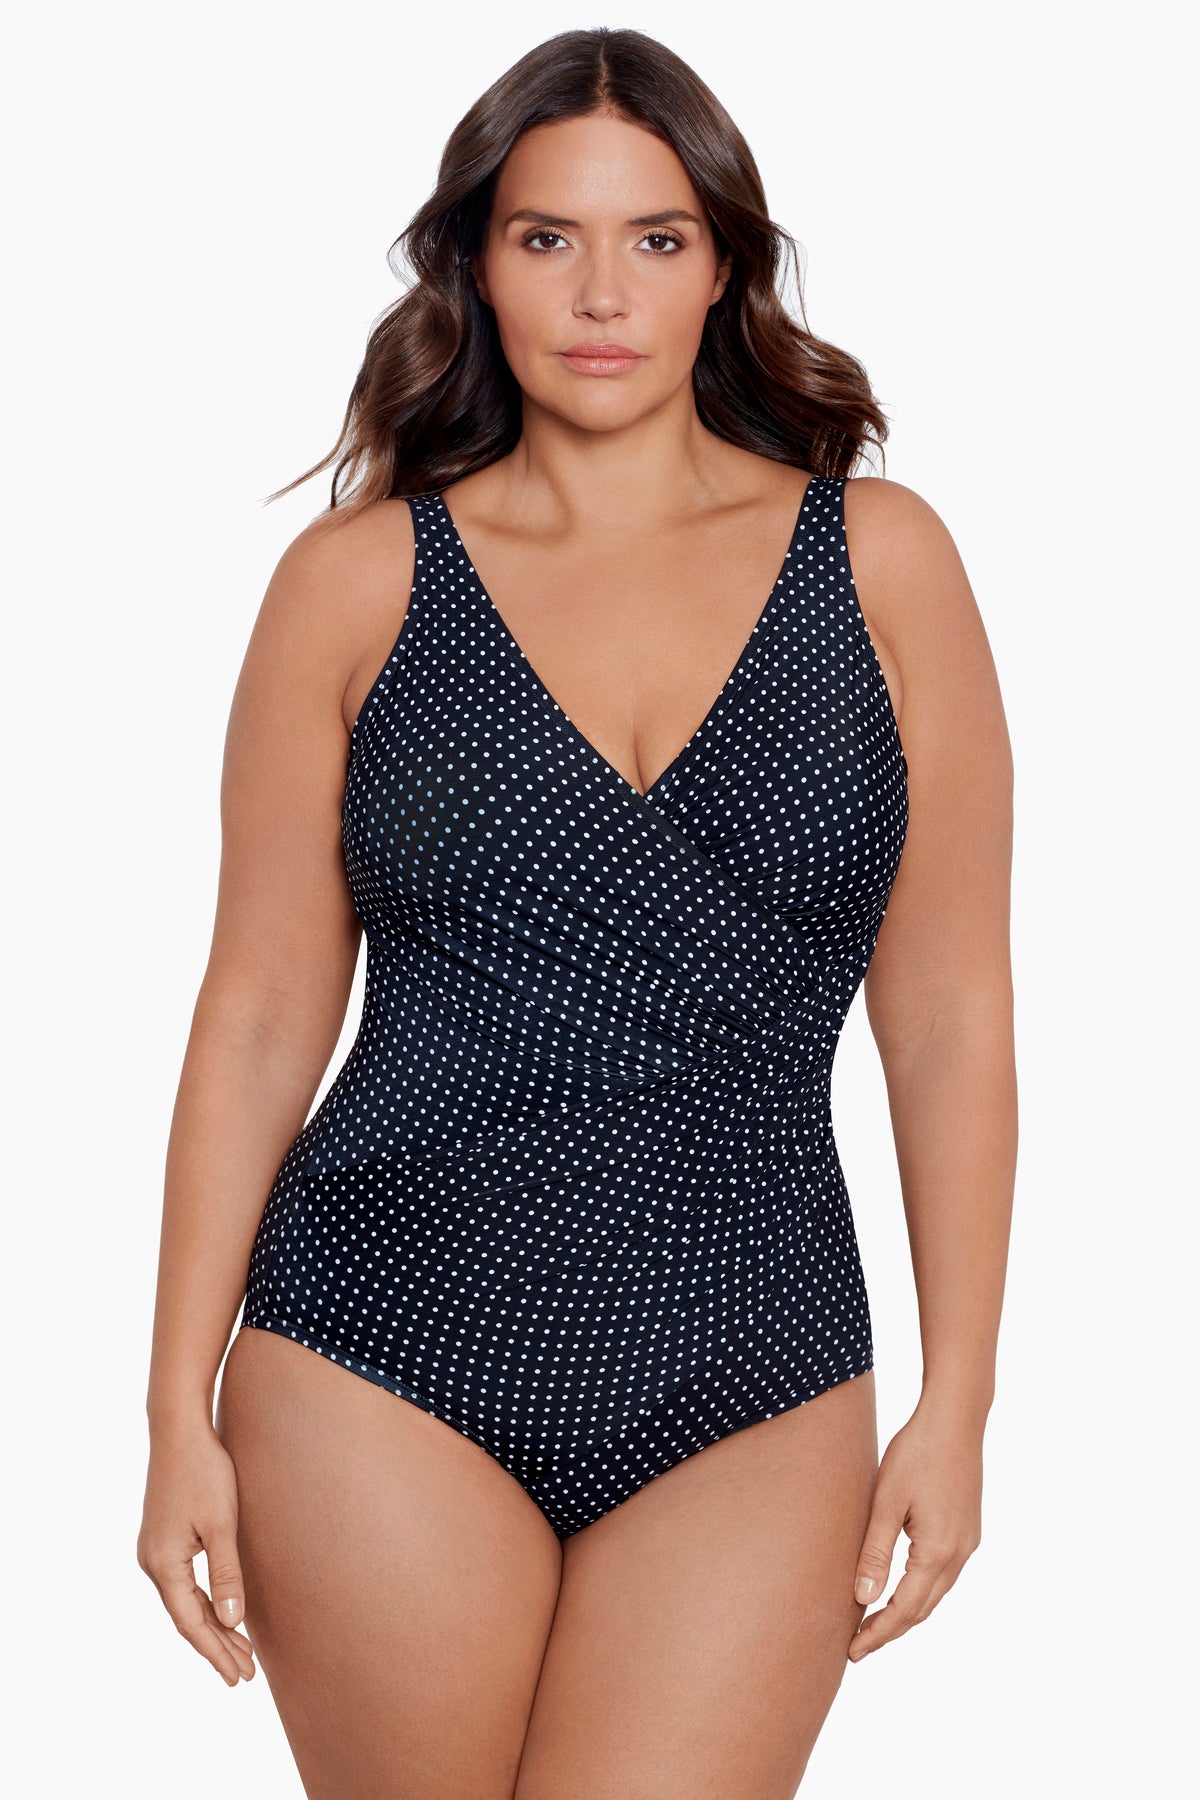 St Barts Push-Up Boost Padded Underwired Tummy Control Swimsuit - Black